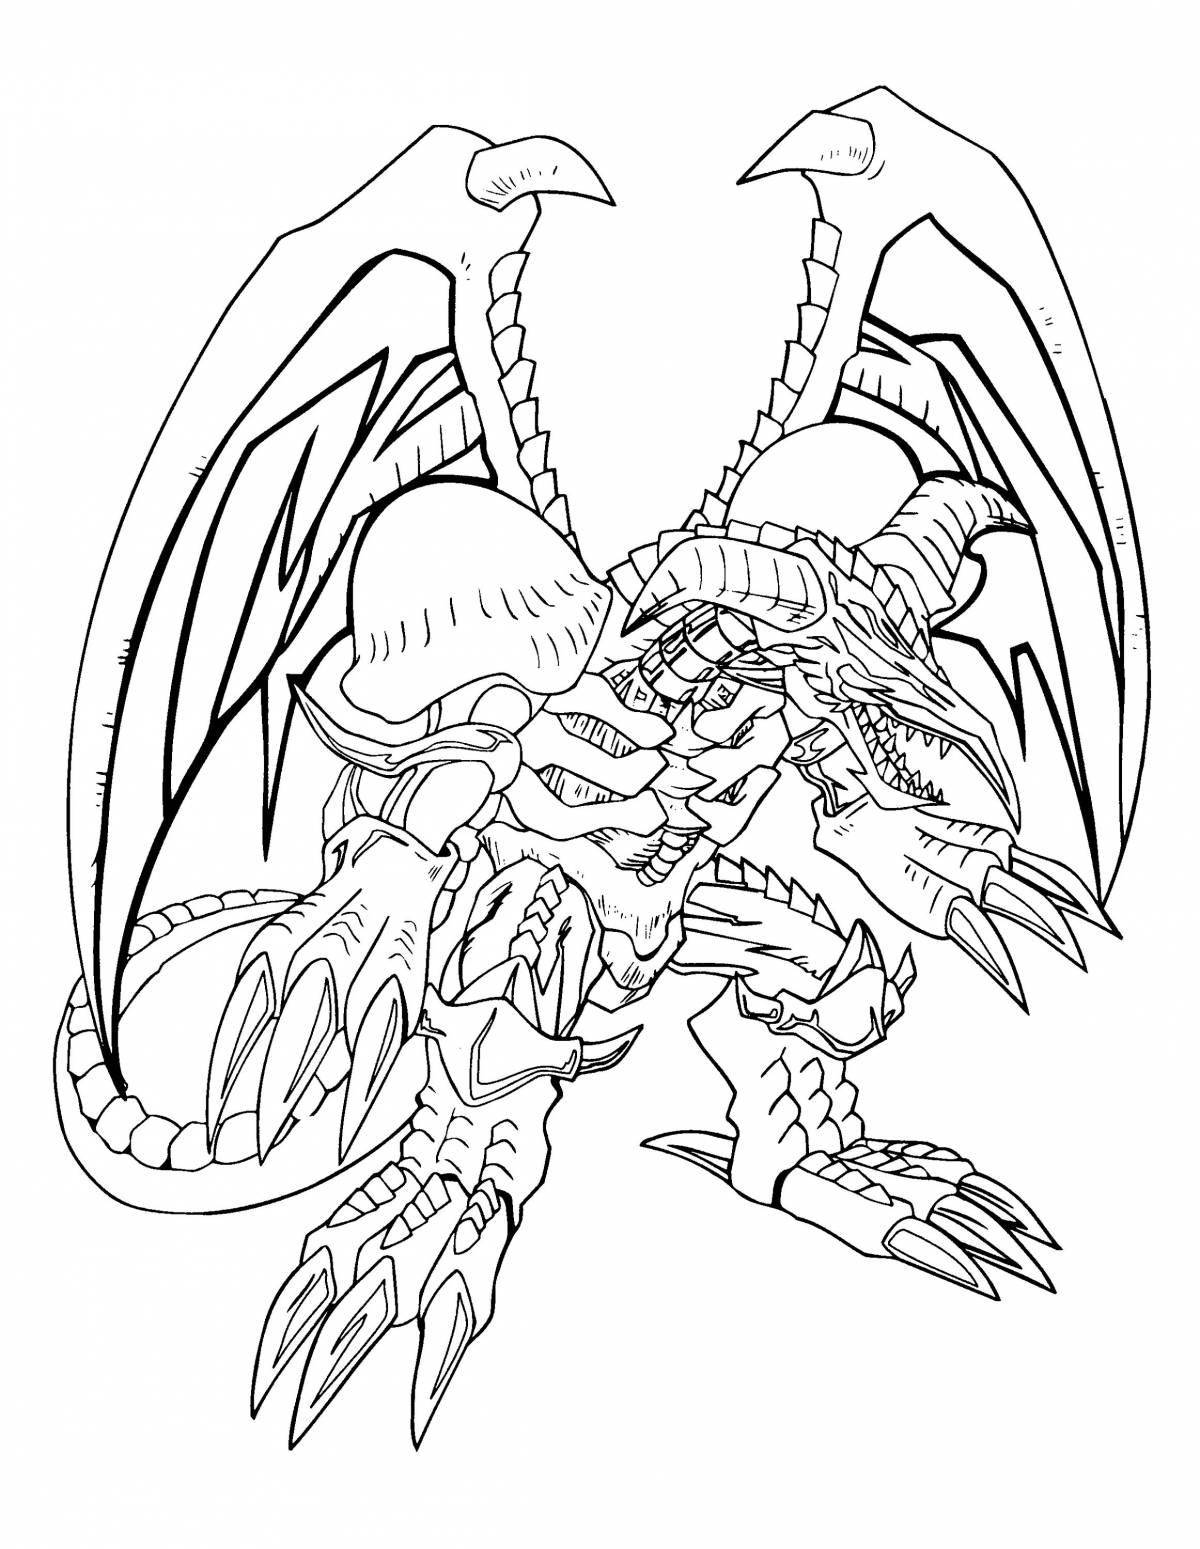 Intricate robot dragon coloring page